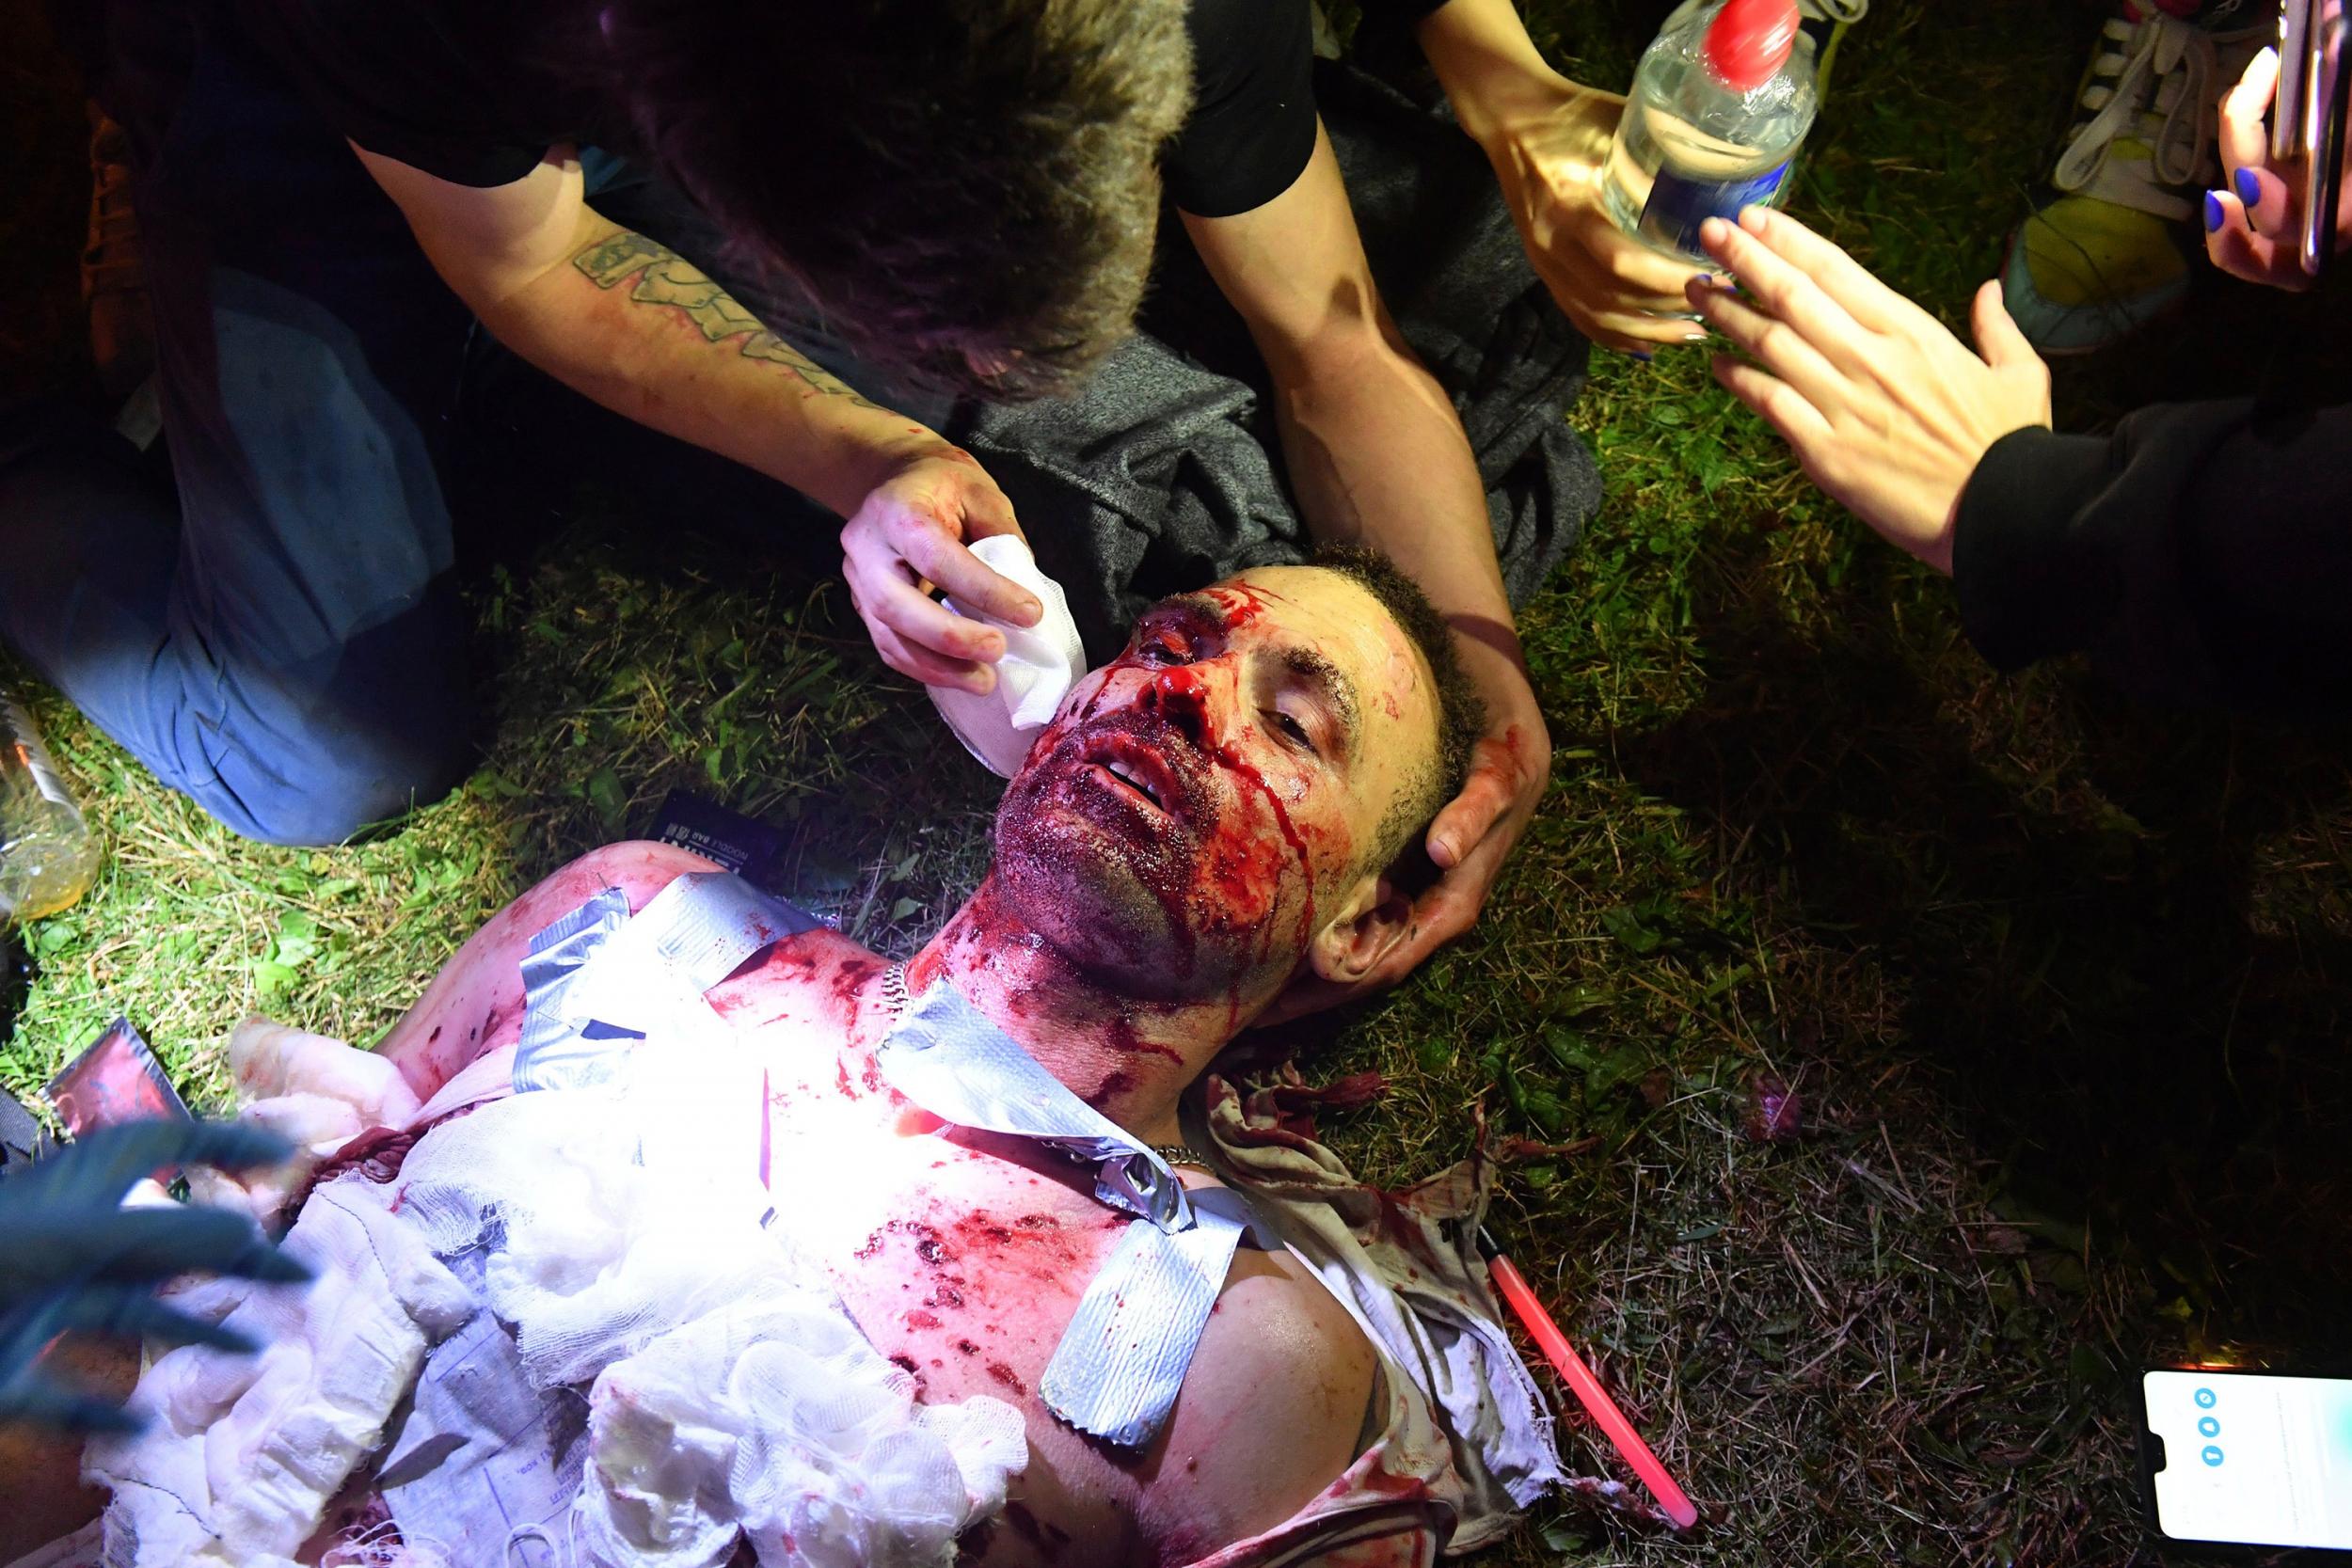 Protesters give aid to a man injured by shrapnel from a smoke grenade during clashes with police